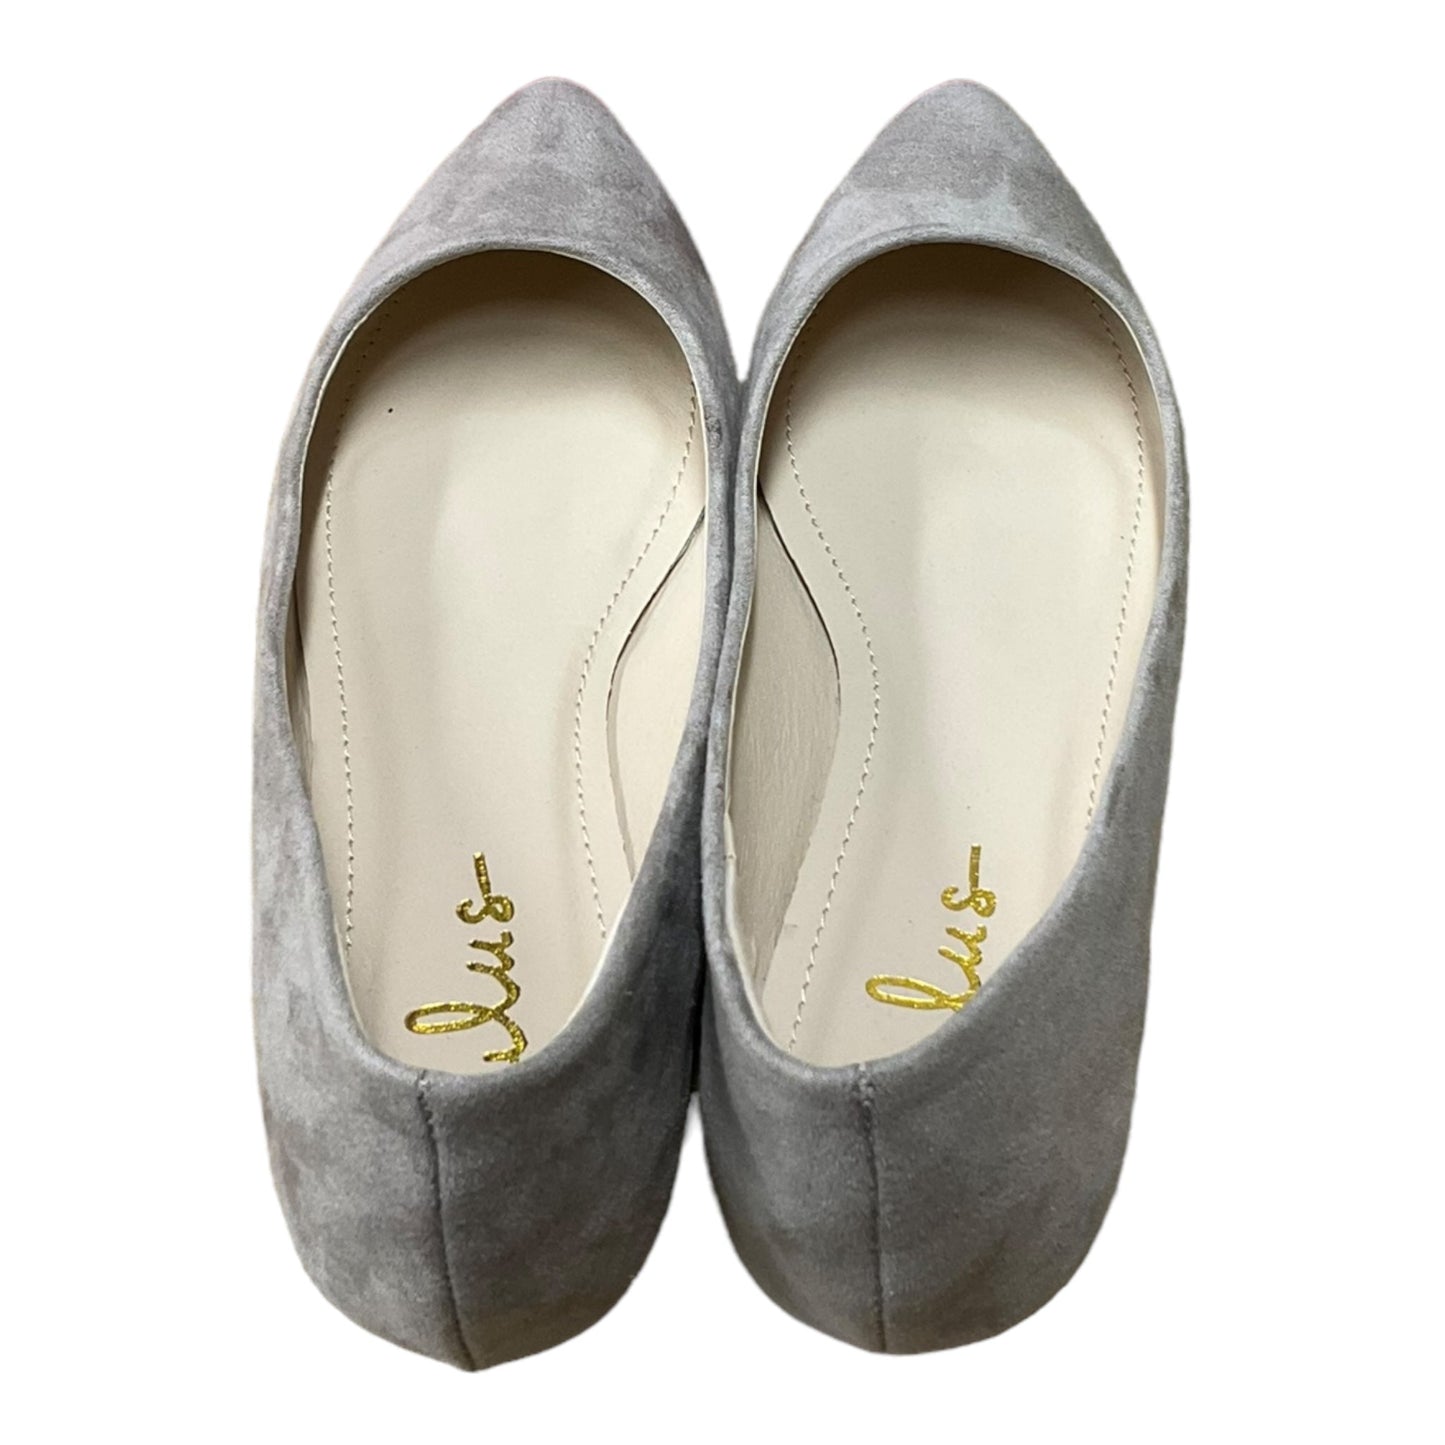 Shoes Flats Ballet By Lulus  Size: 6.5